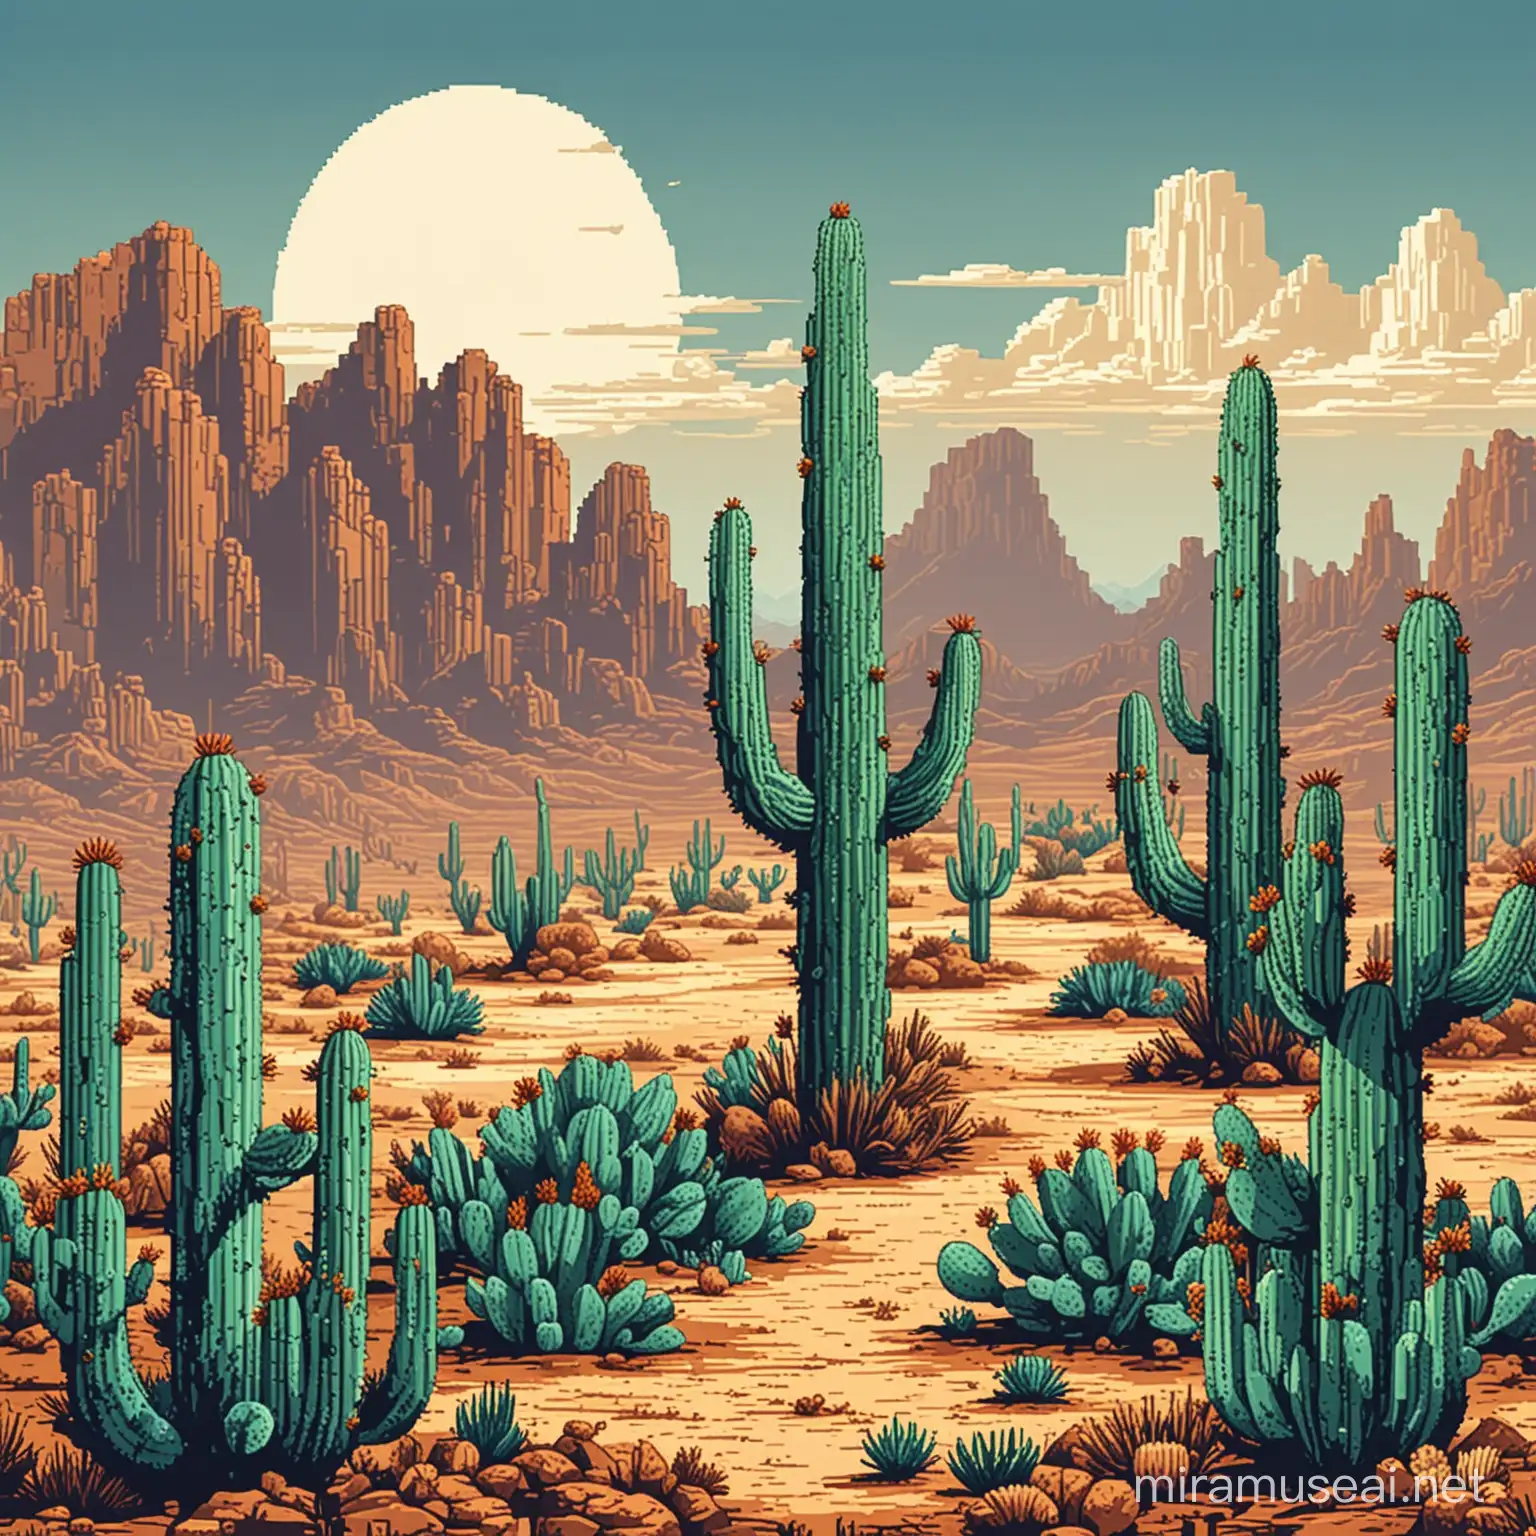 8Bit Pixel Art Desert Landscape with Cactus in Blue Brown and Green